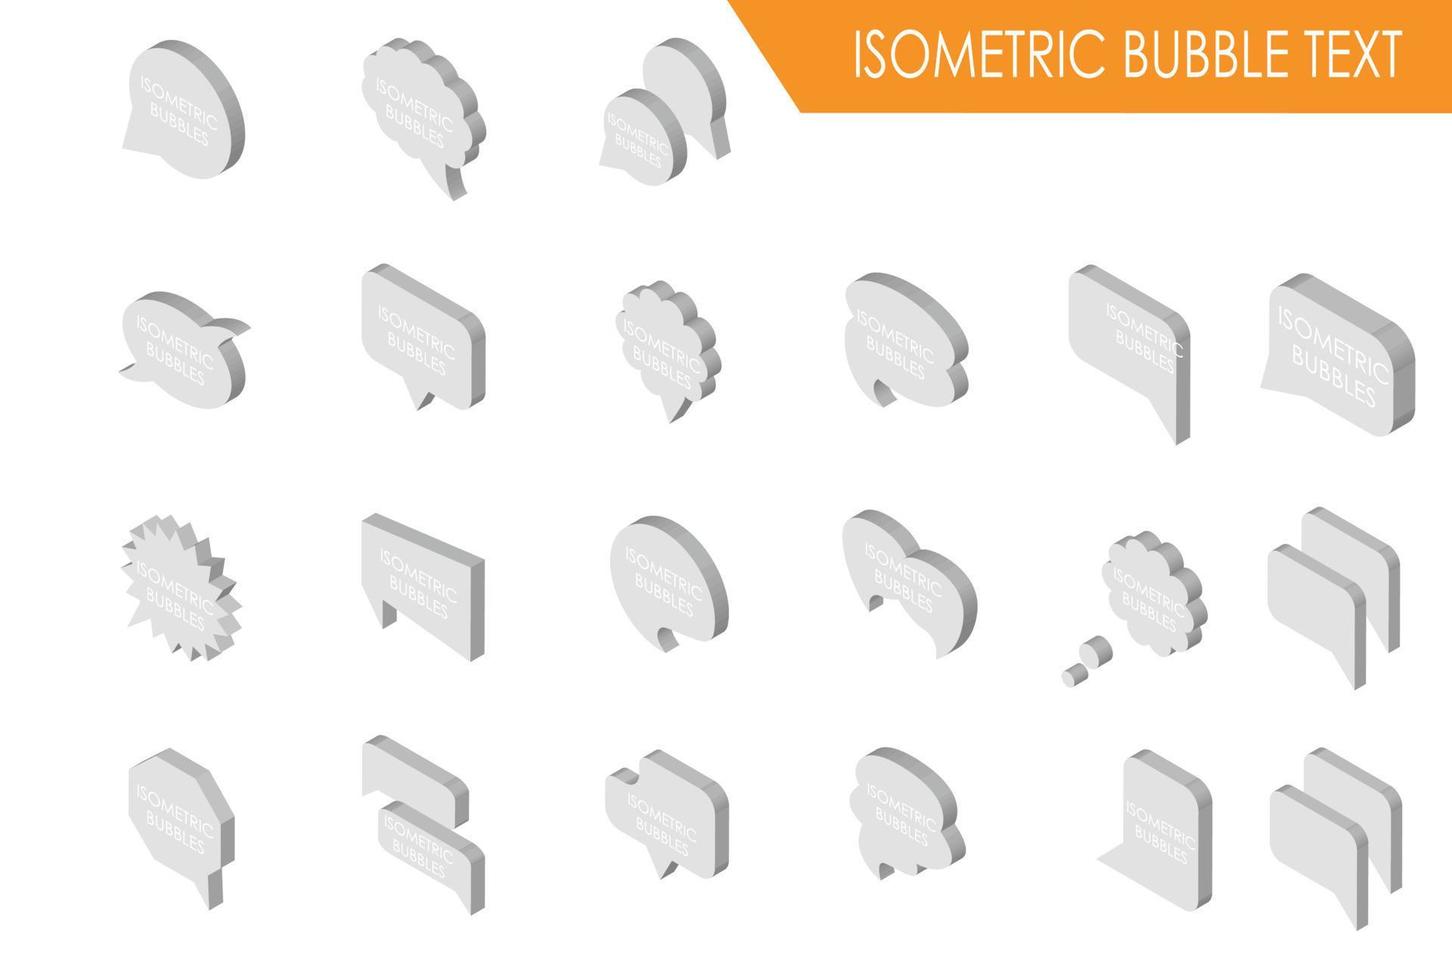 Modern Isometric Bubble Text Illustration, Suitable for Diagrams, Infographics, Book Illustration, Game Asset, And Other Graphic Related Assets vector